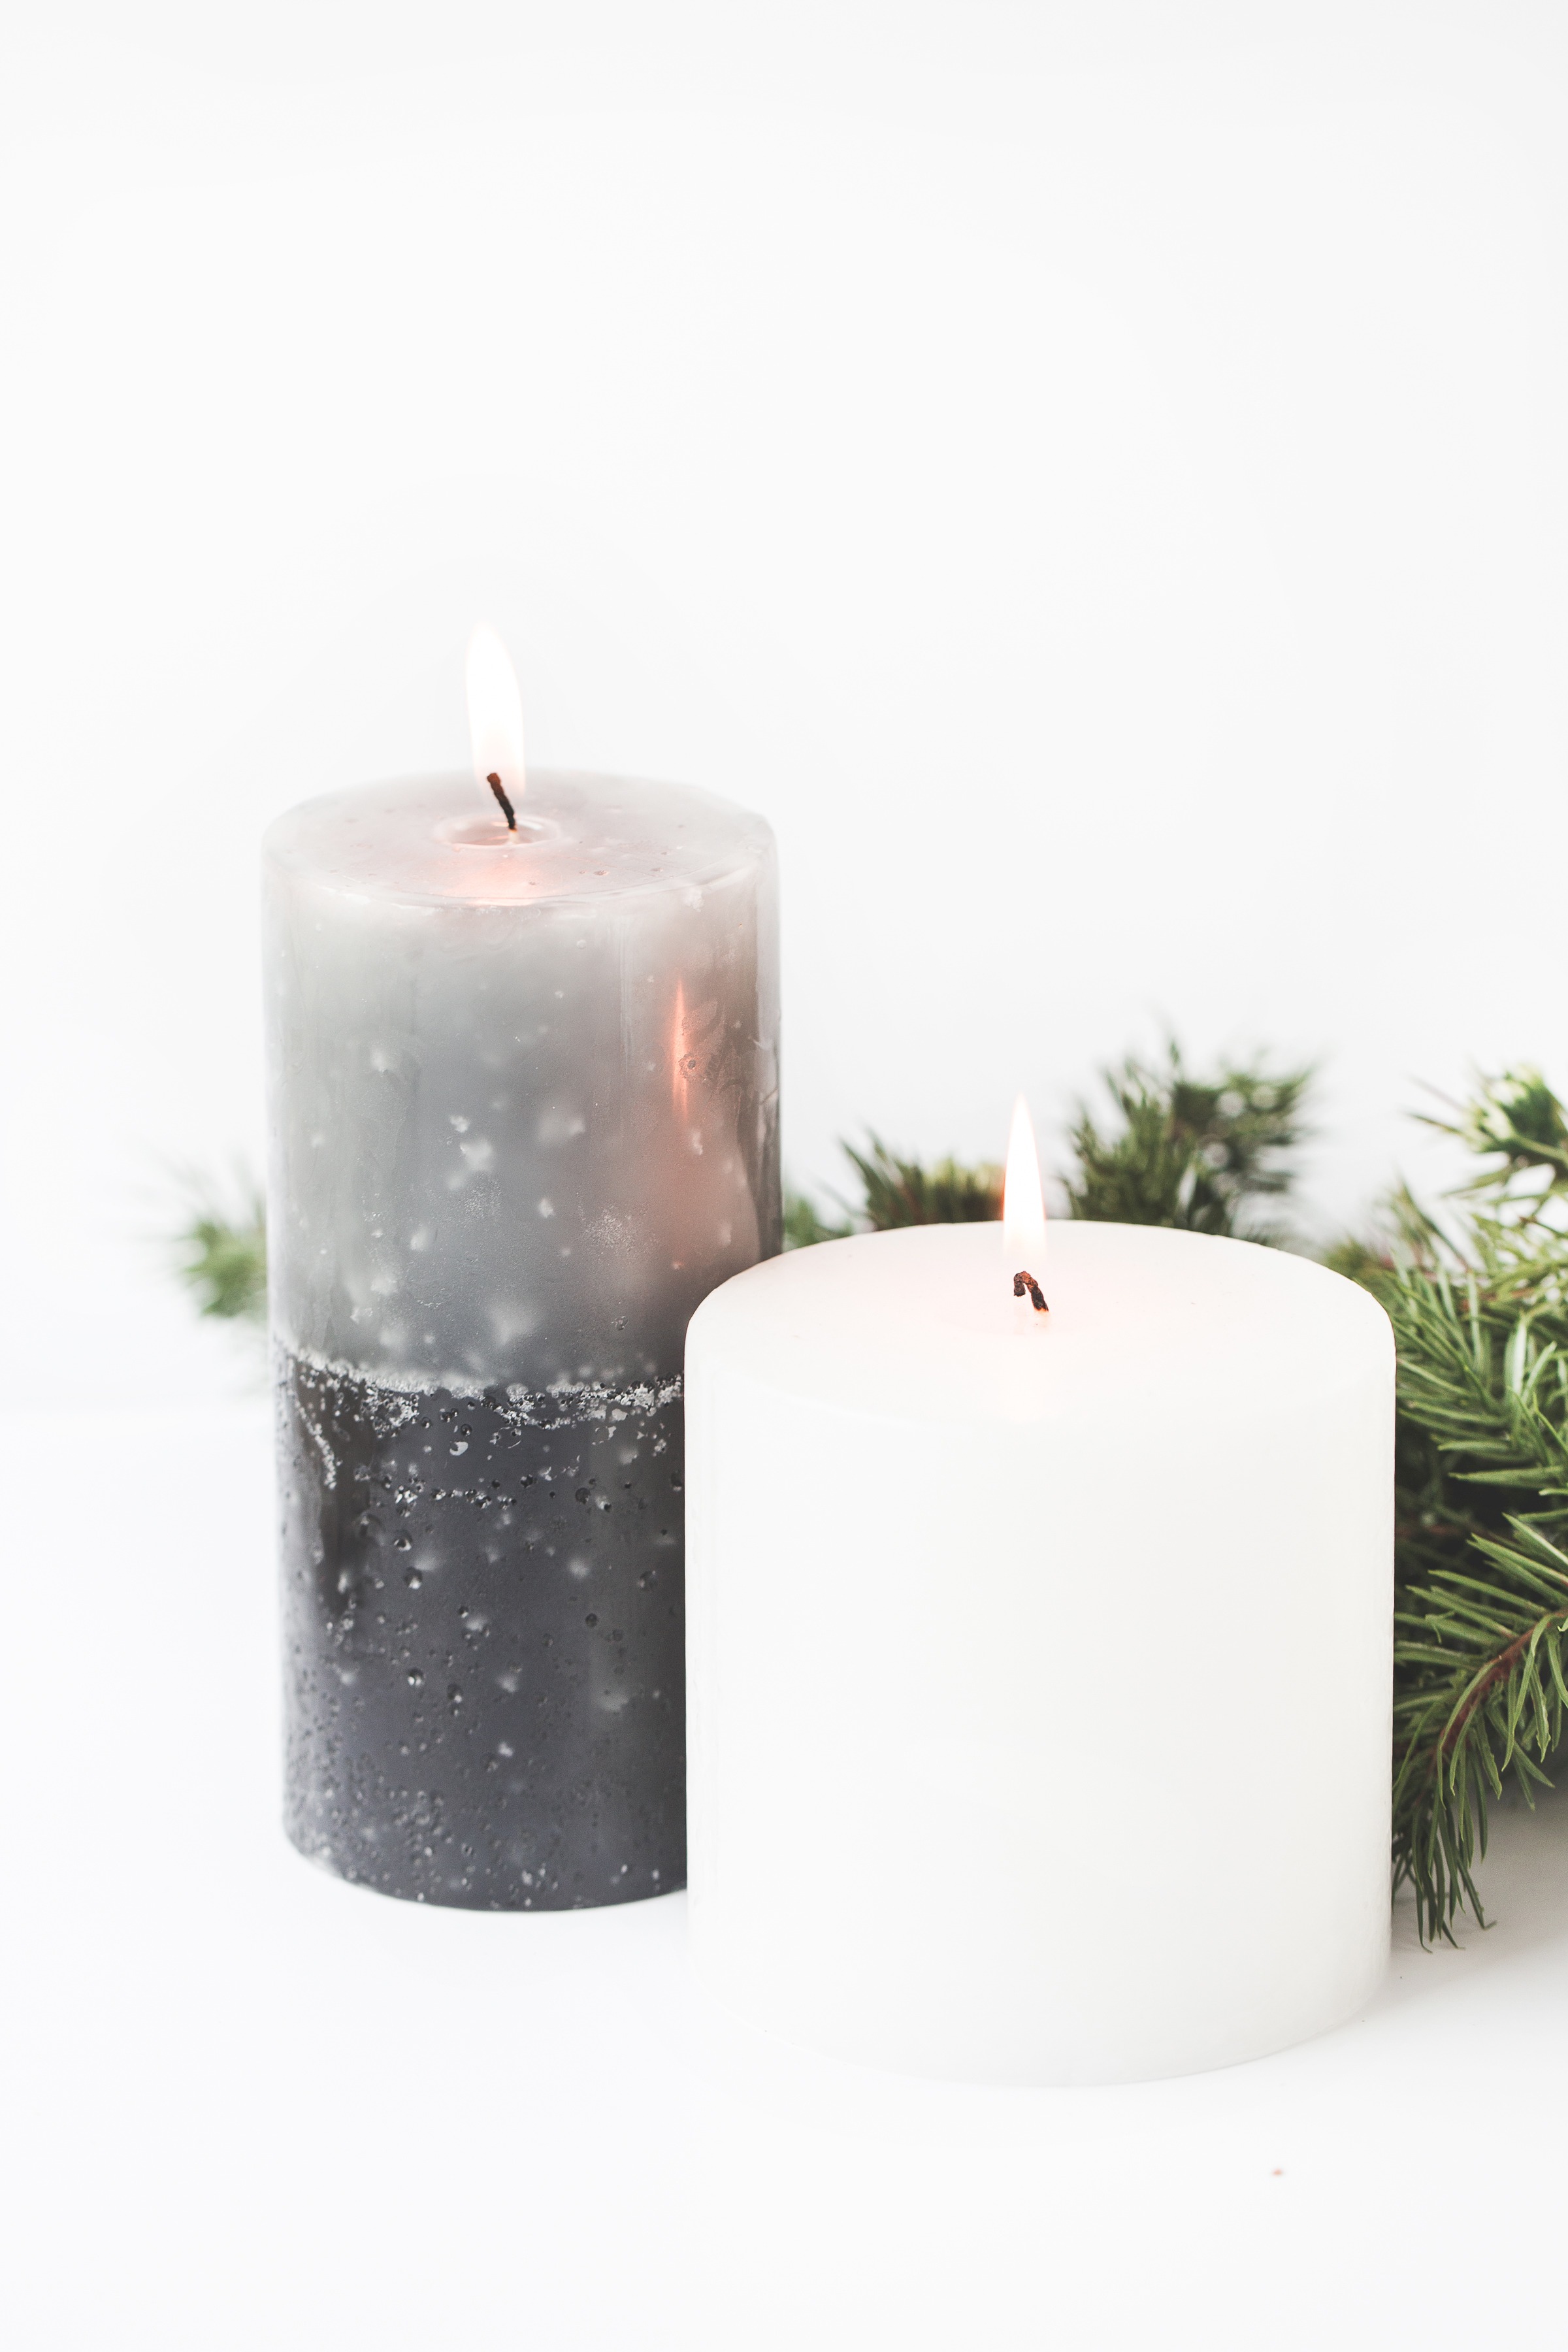 The Best Candles to Make Your House More Festive 68